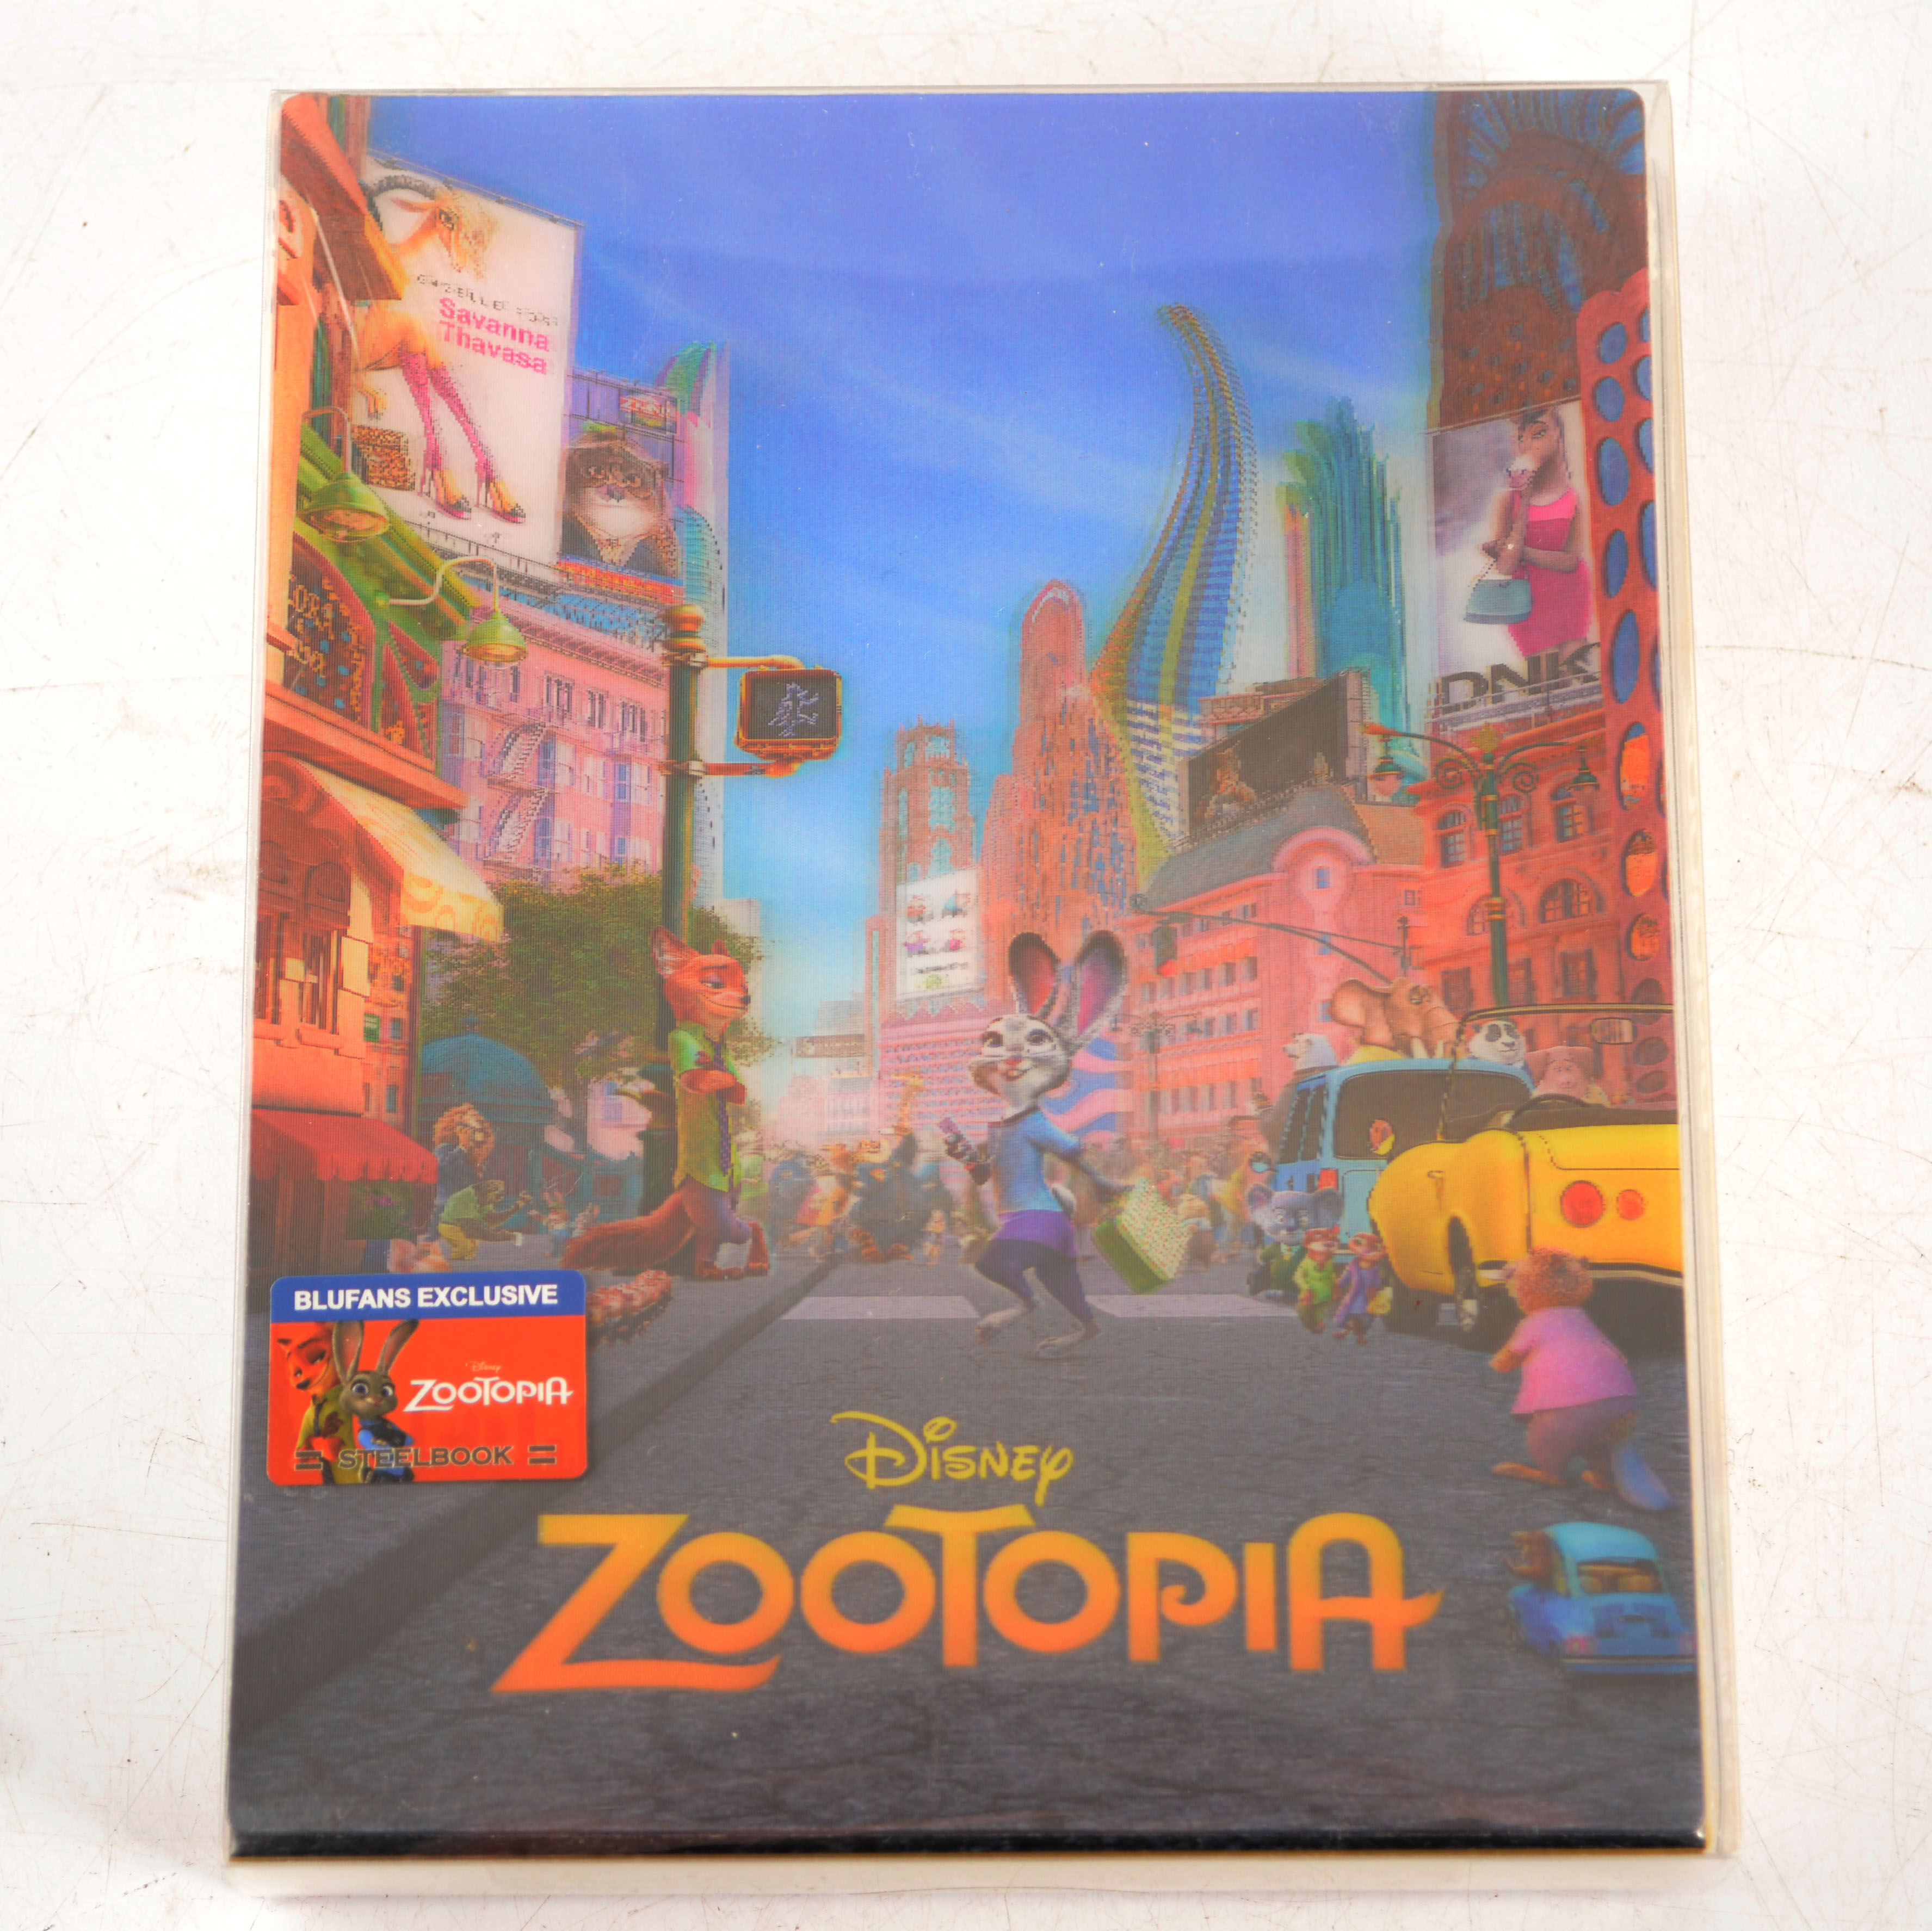 Blufans Exclusive Steelbook Lenticular Blu-ray, Zootopia by Disney - Image 2 of 2